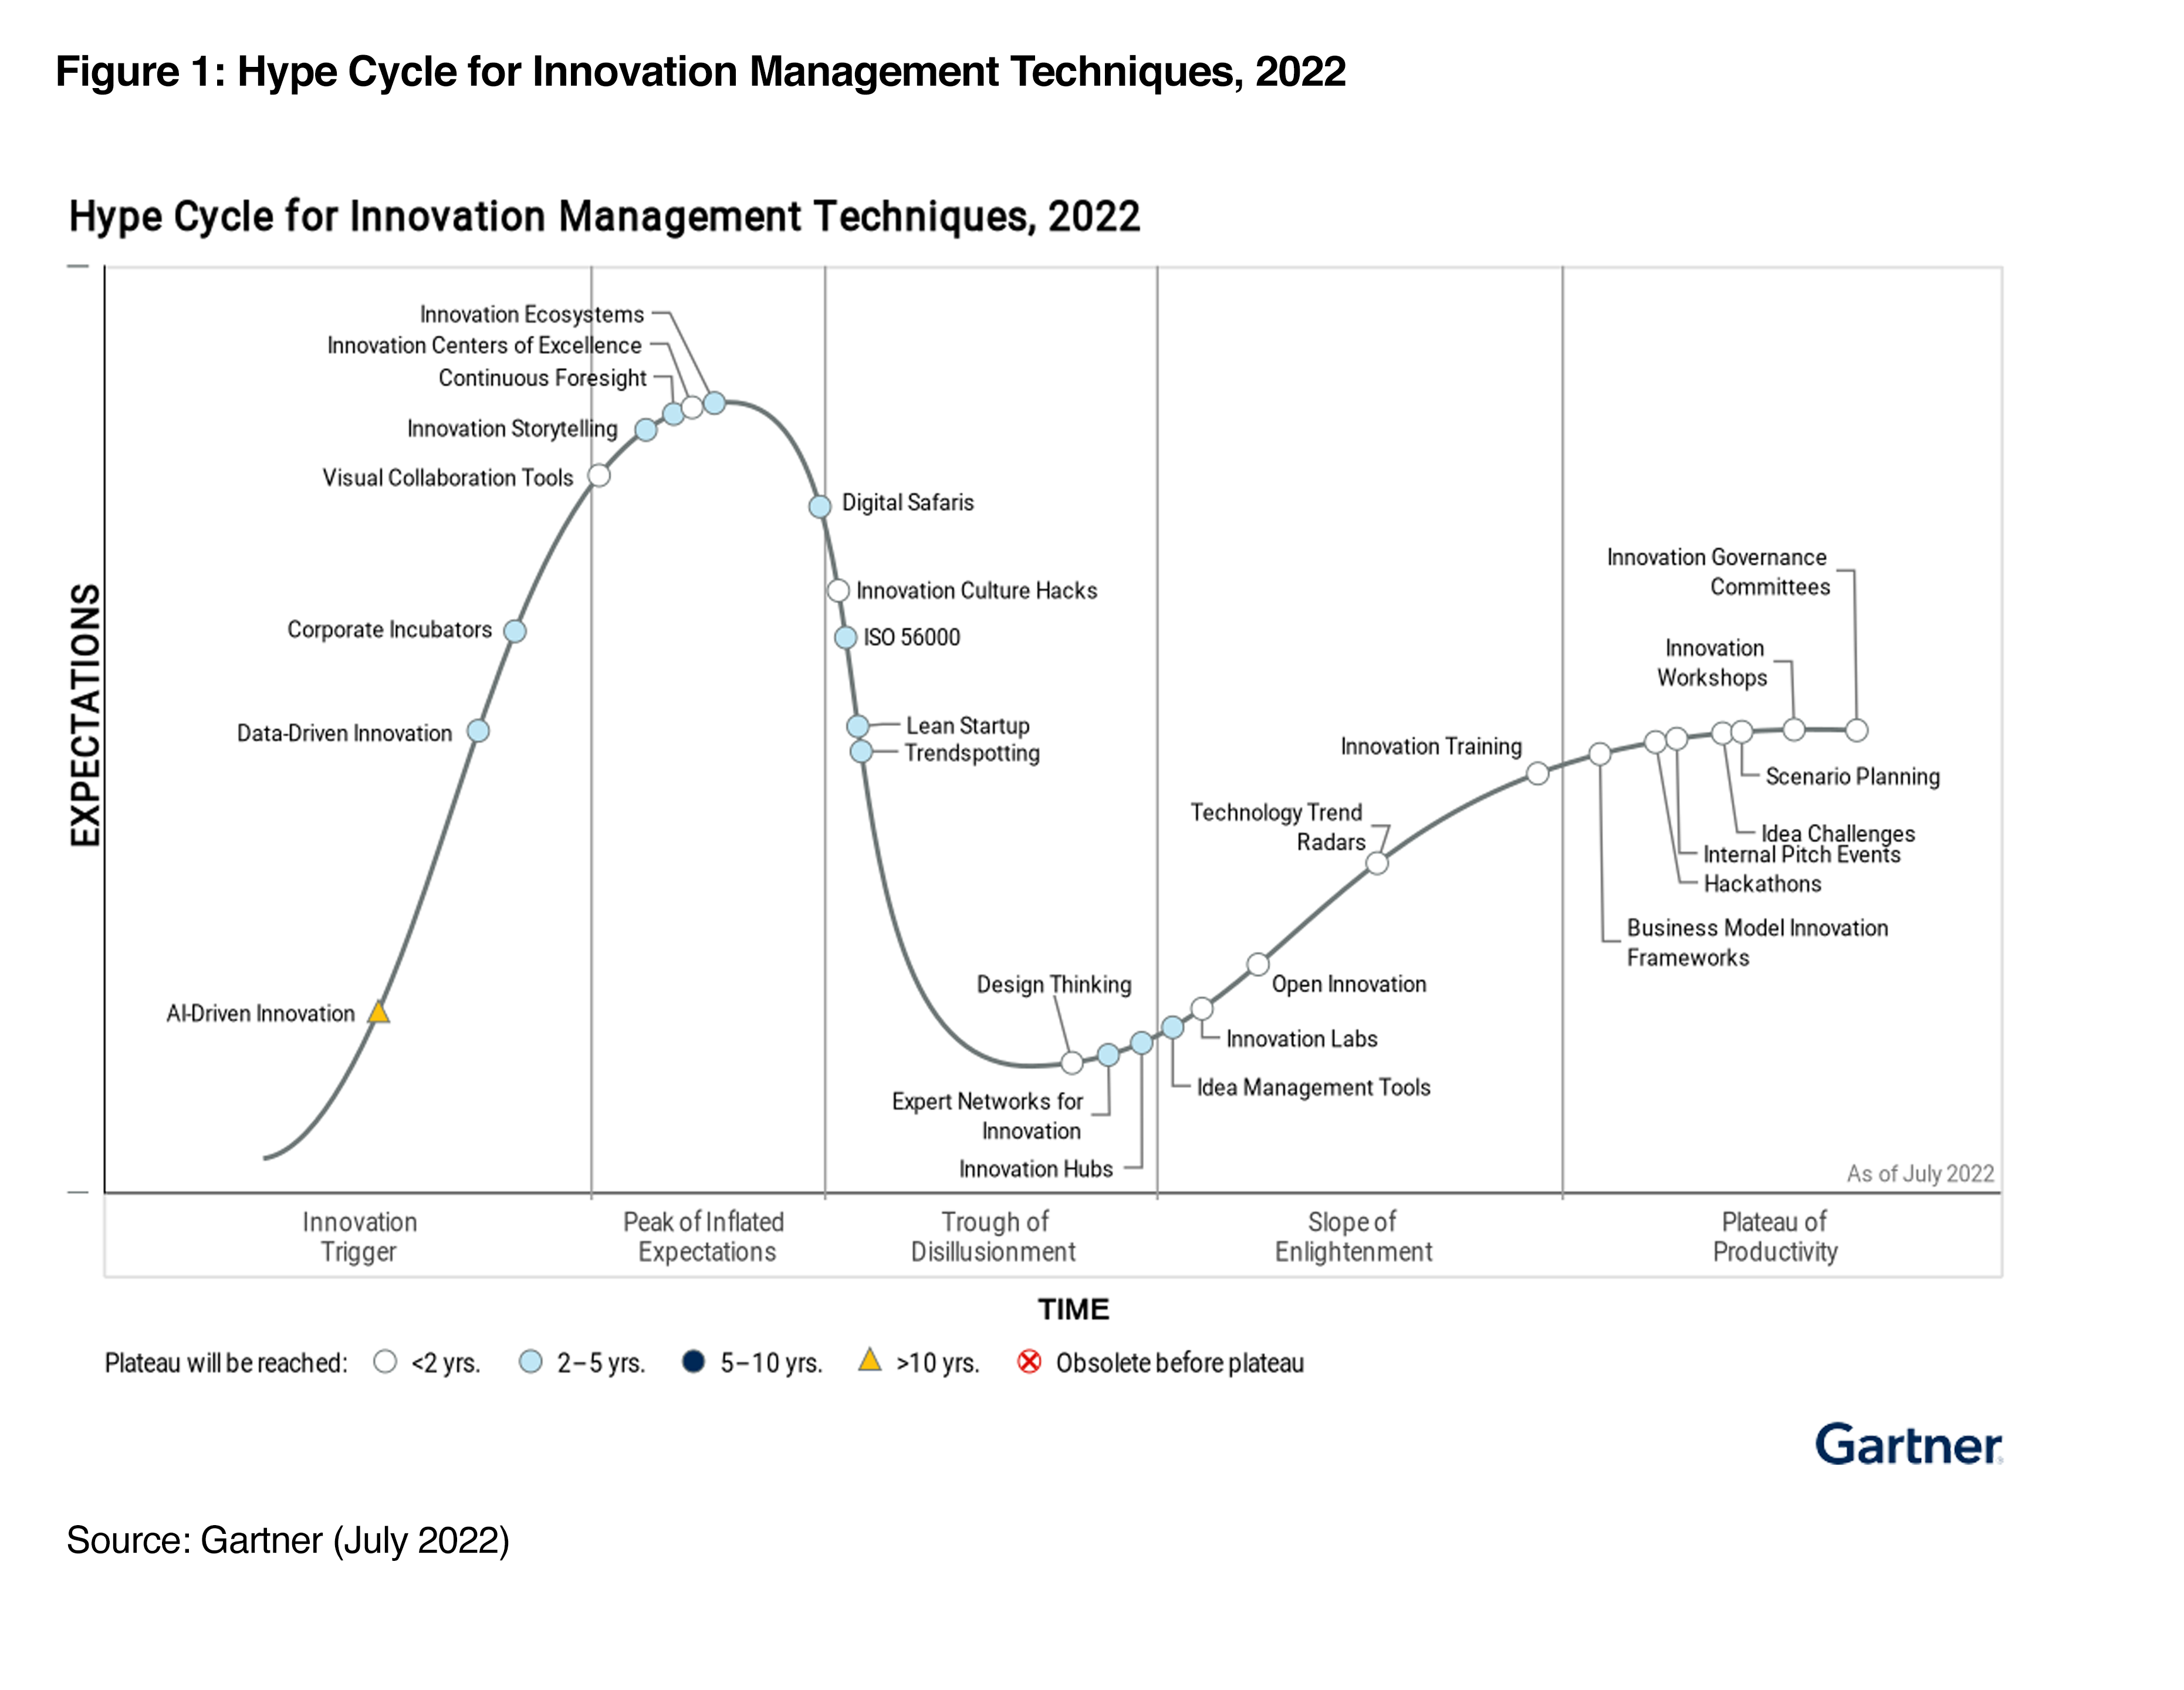 Featured image: ITONICS im Gartner® Hype Cycle™ for Innovation Management Techniques 2022